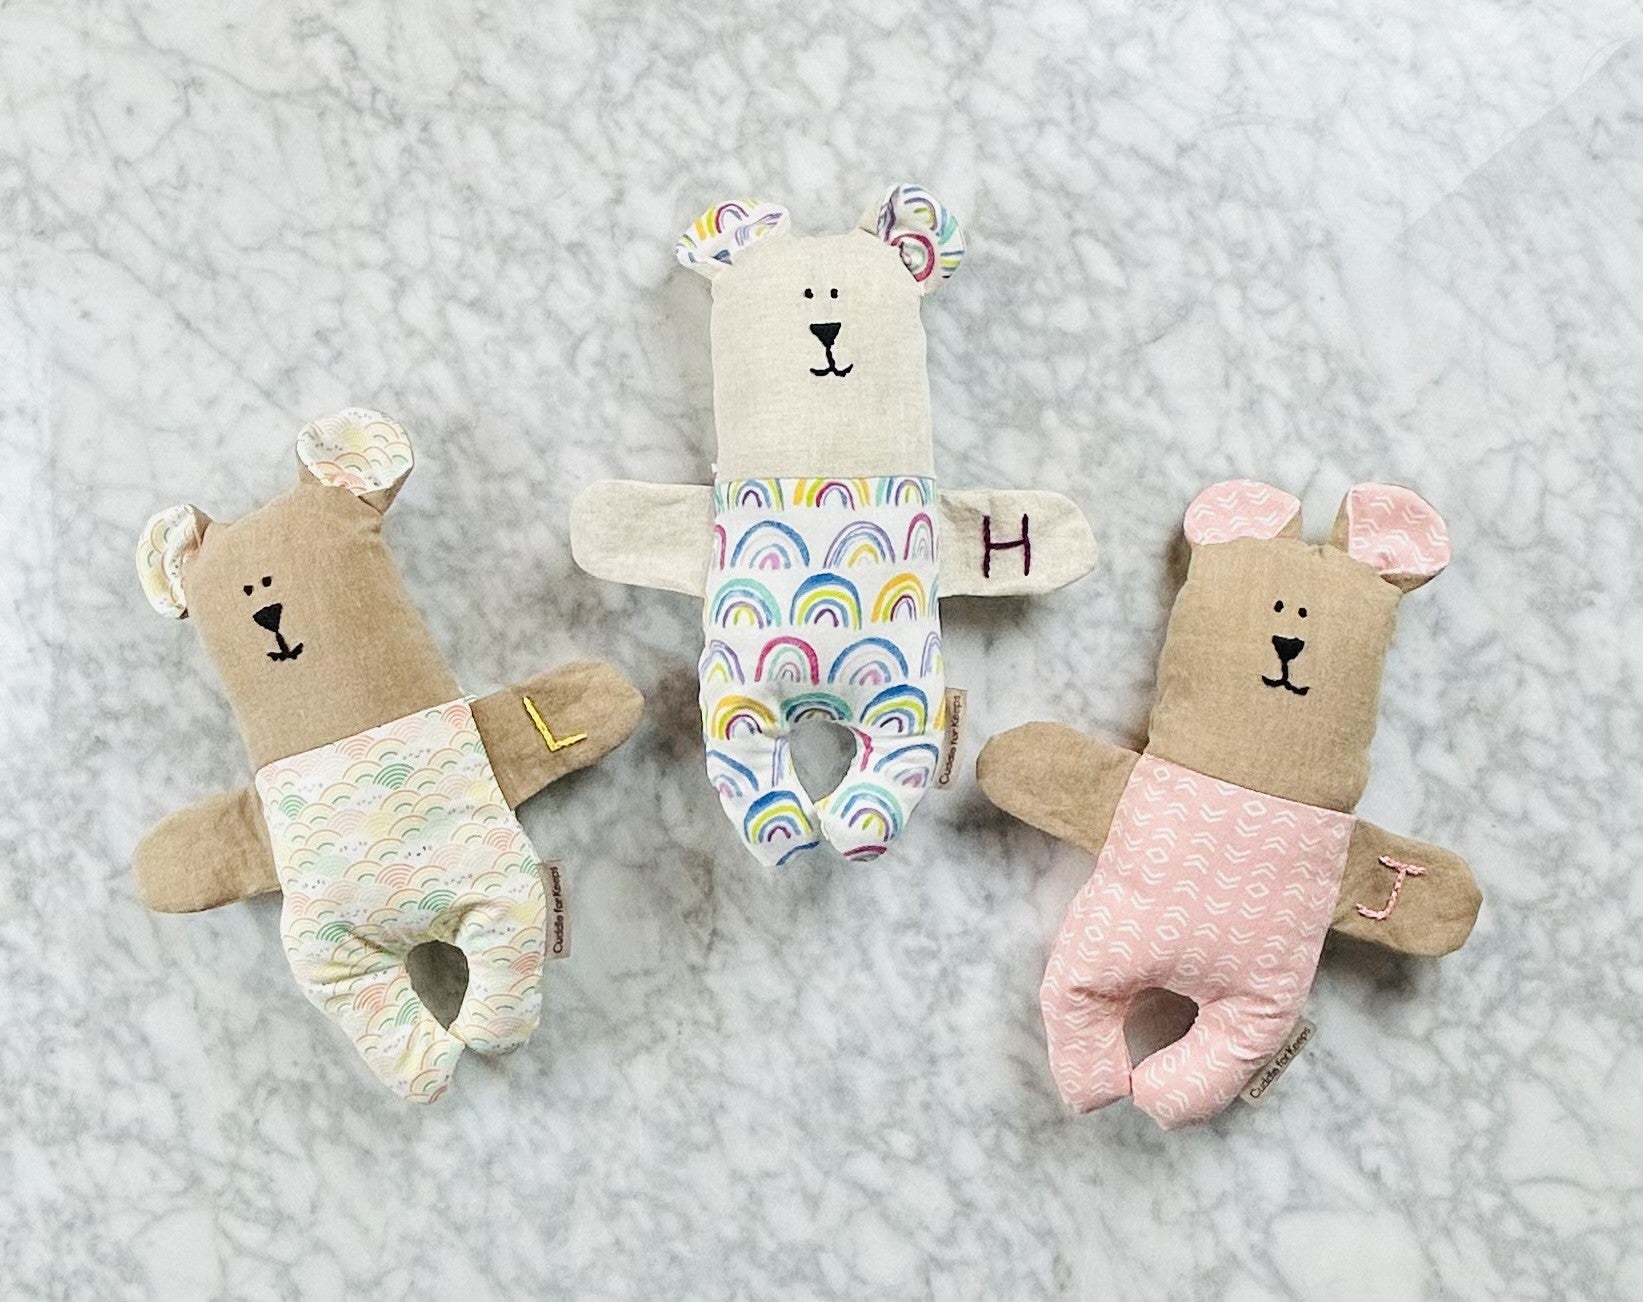 Weighted bears to relieve feelings of anxiety. Handmade and personalized. 